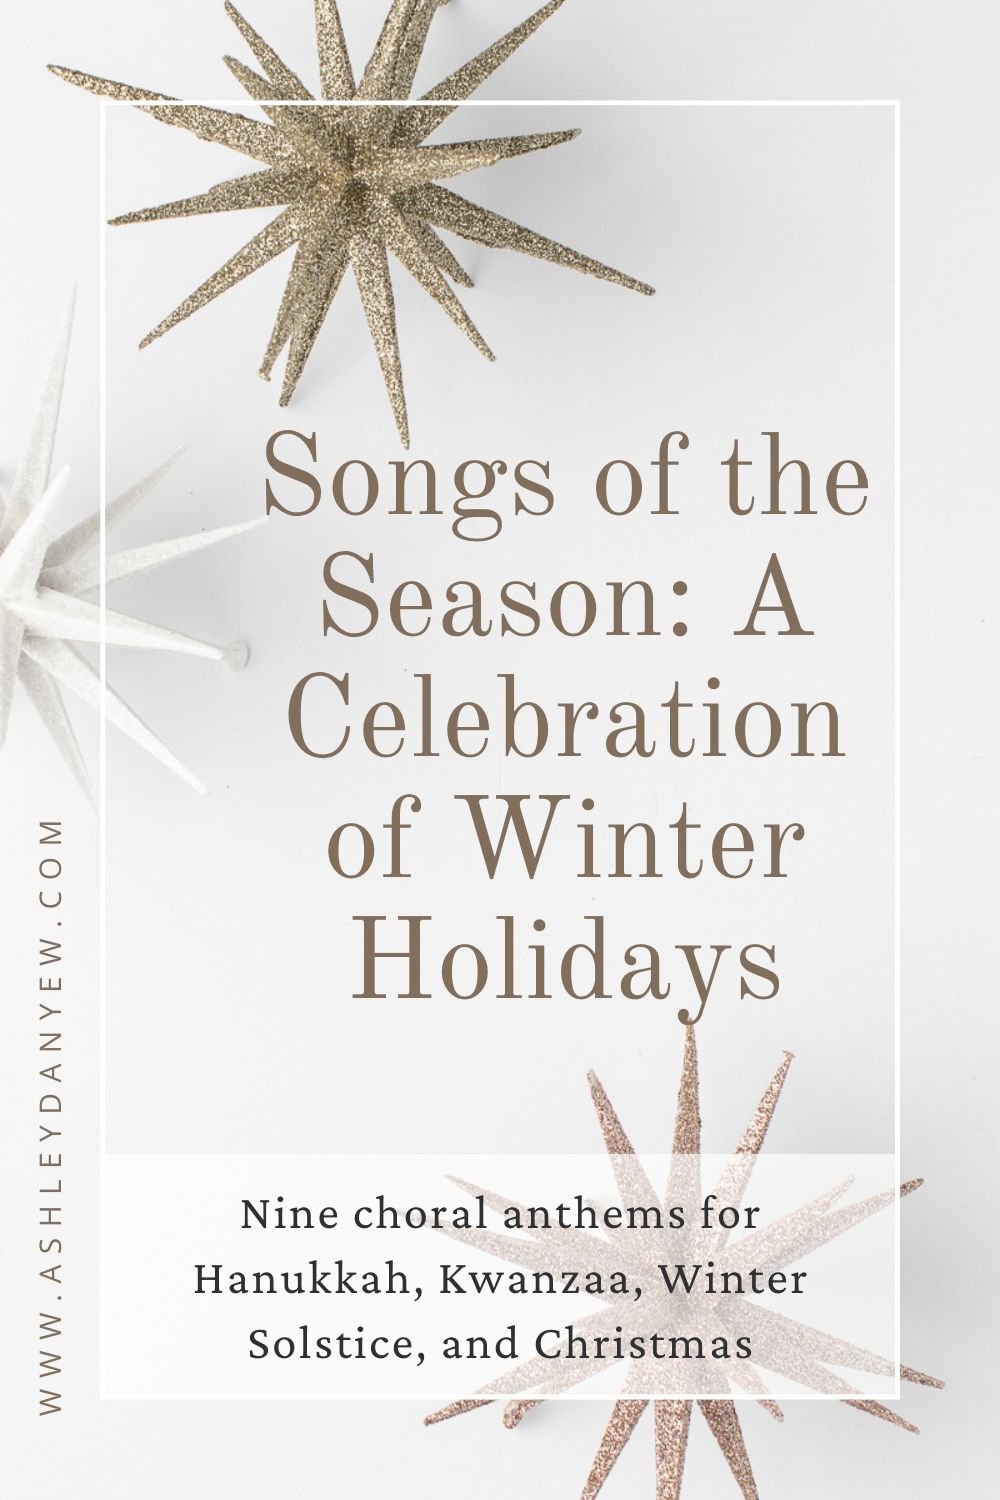 Songs of the Season: A Celebration of Winter Holidays